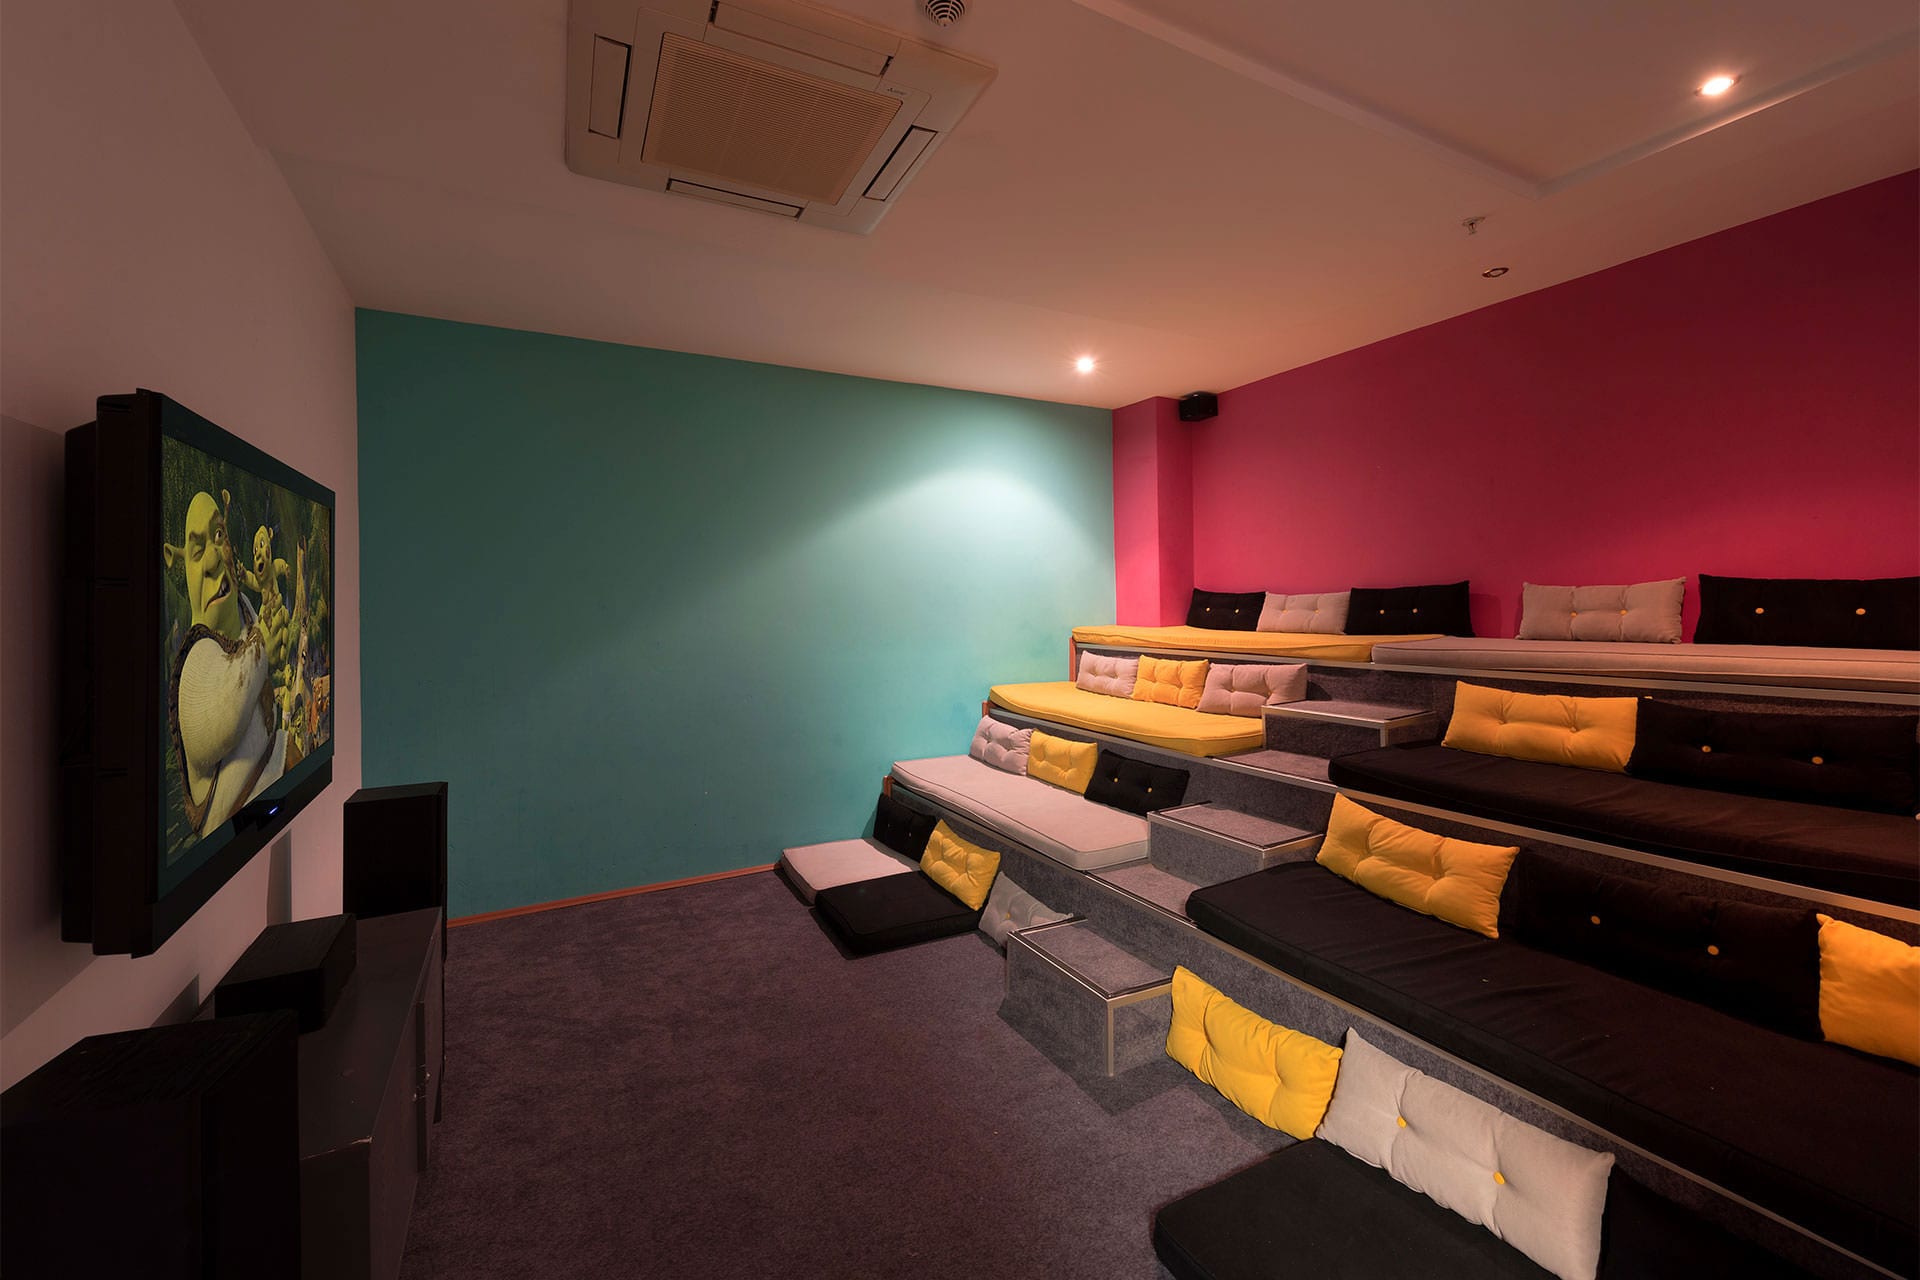 Spend time in the cinema room